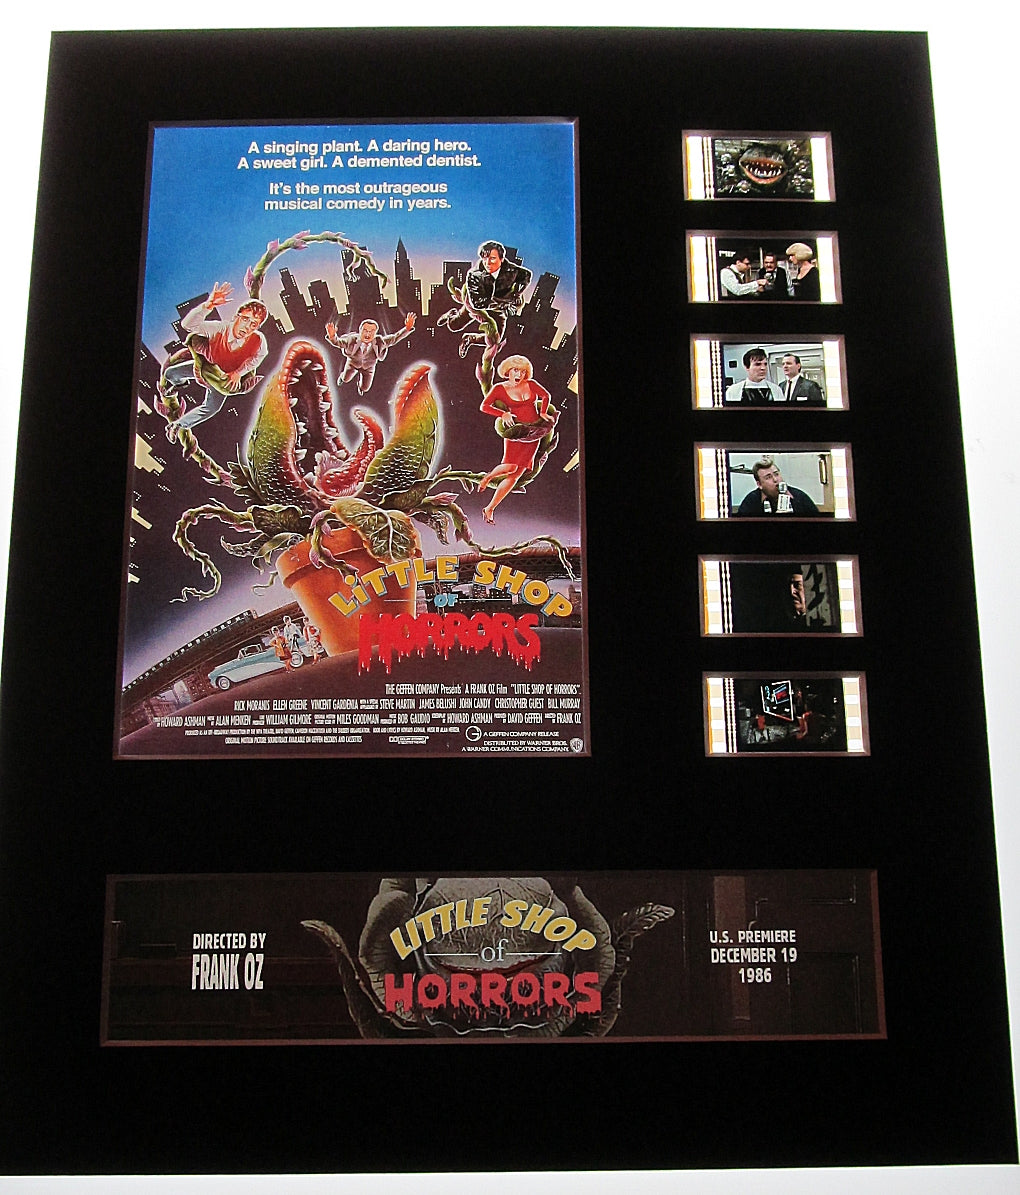 LITTLE SHOP OF HORRORS 35mm Movie Film Cell Display 8x10 Presentation Horror Classic